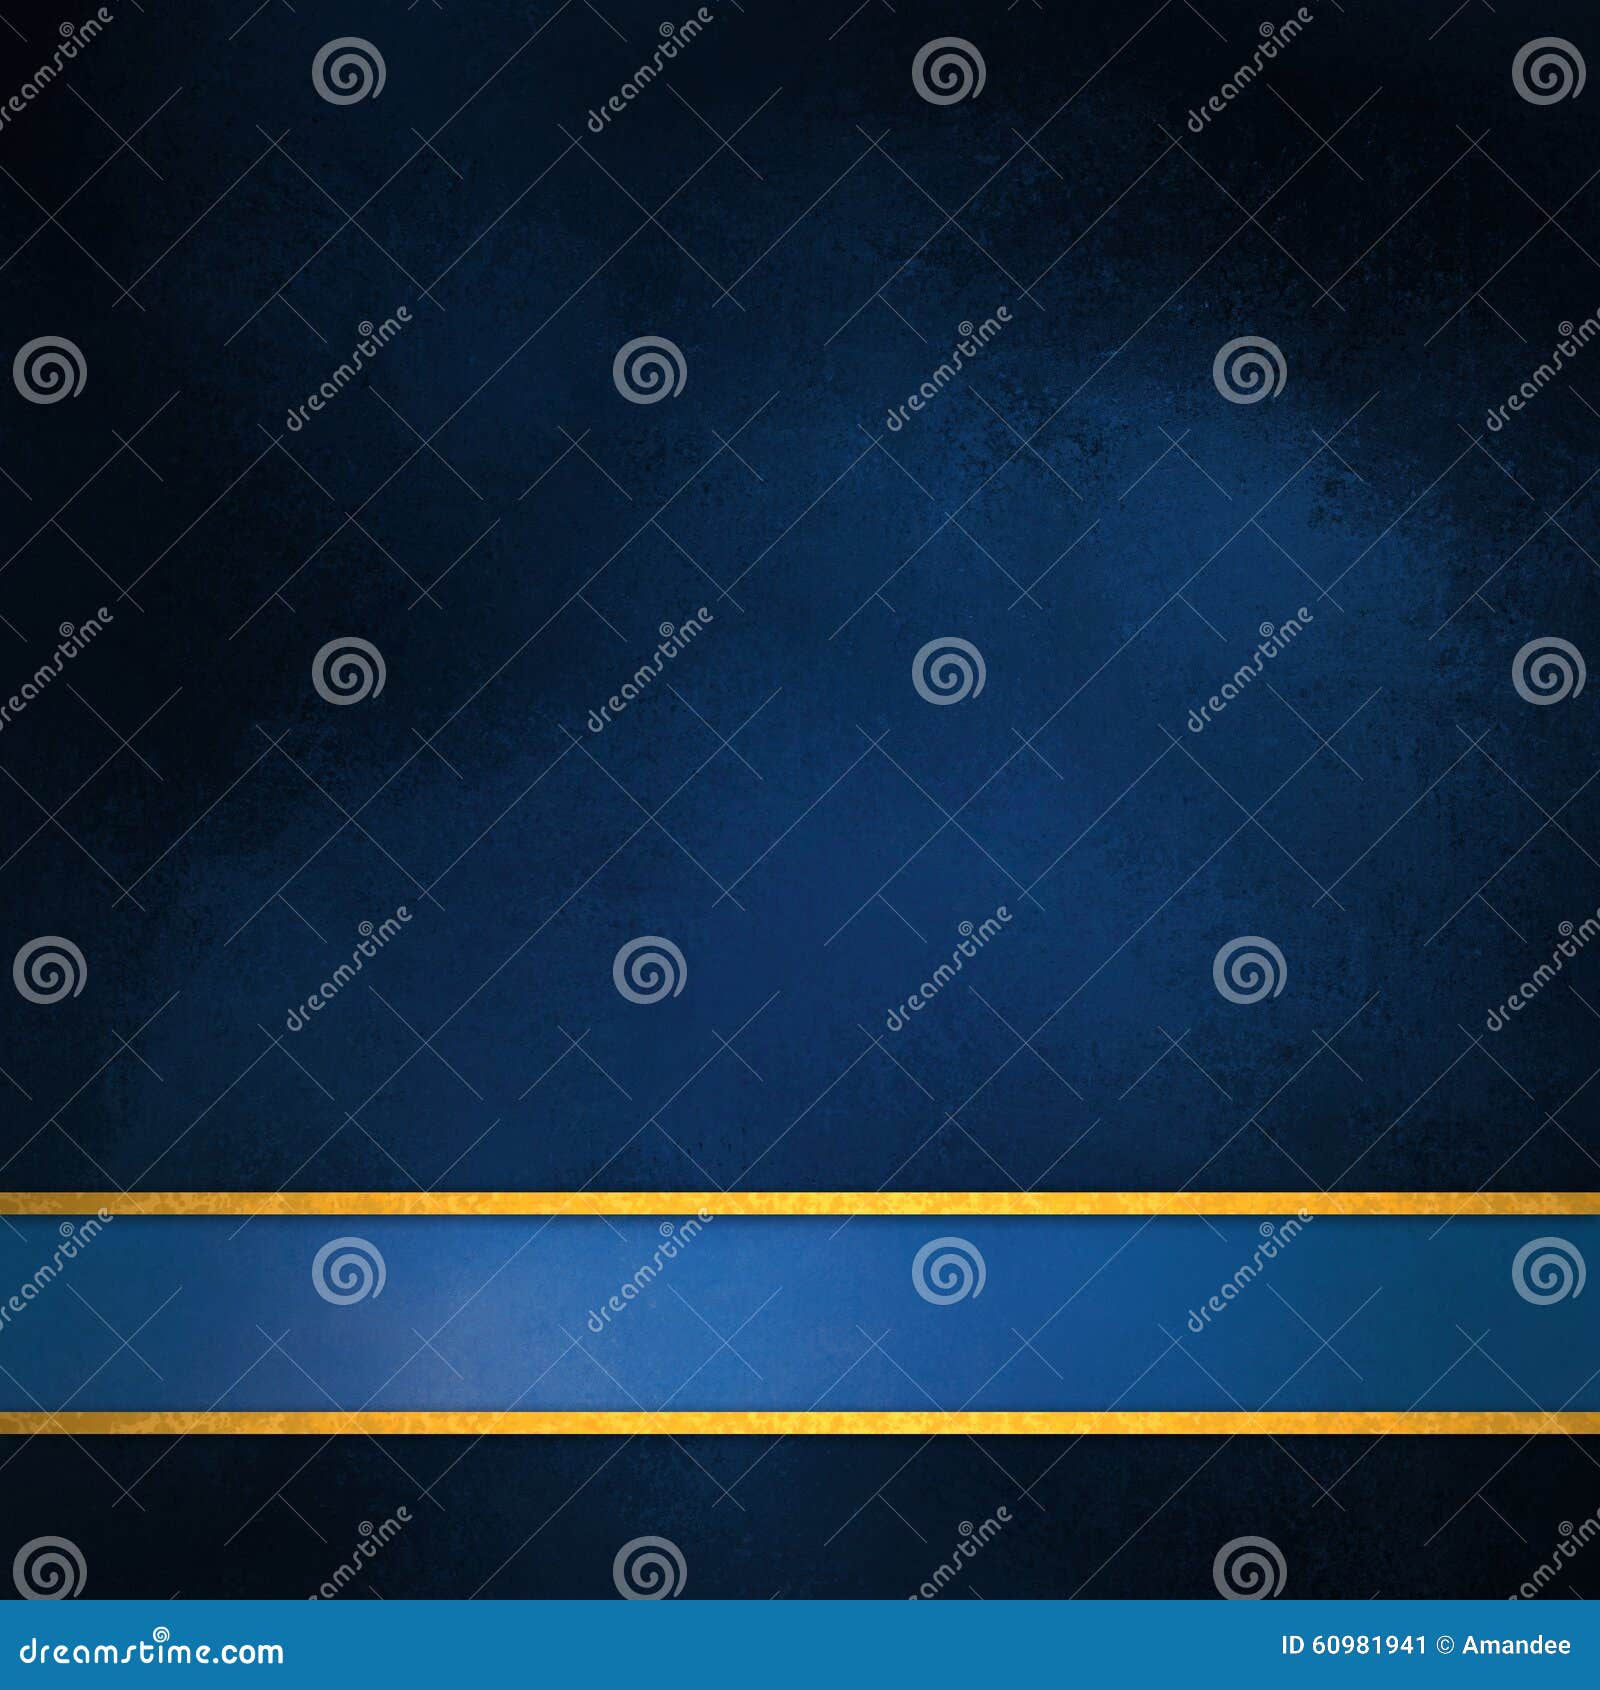 elegant blue background layout with blank blue and gold stripe footer